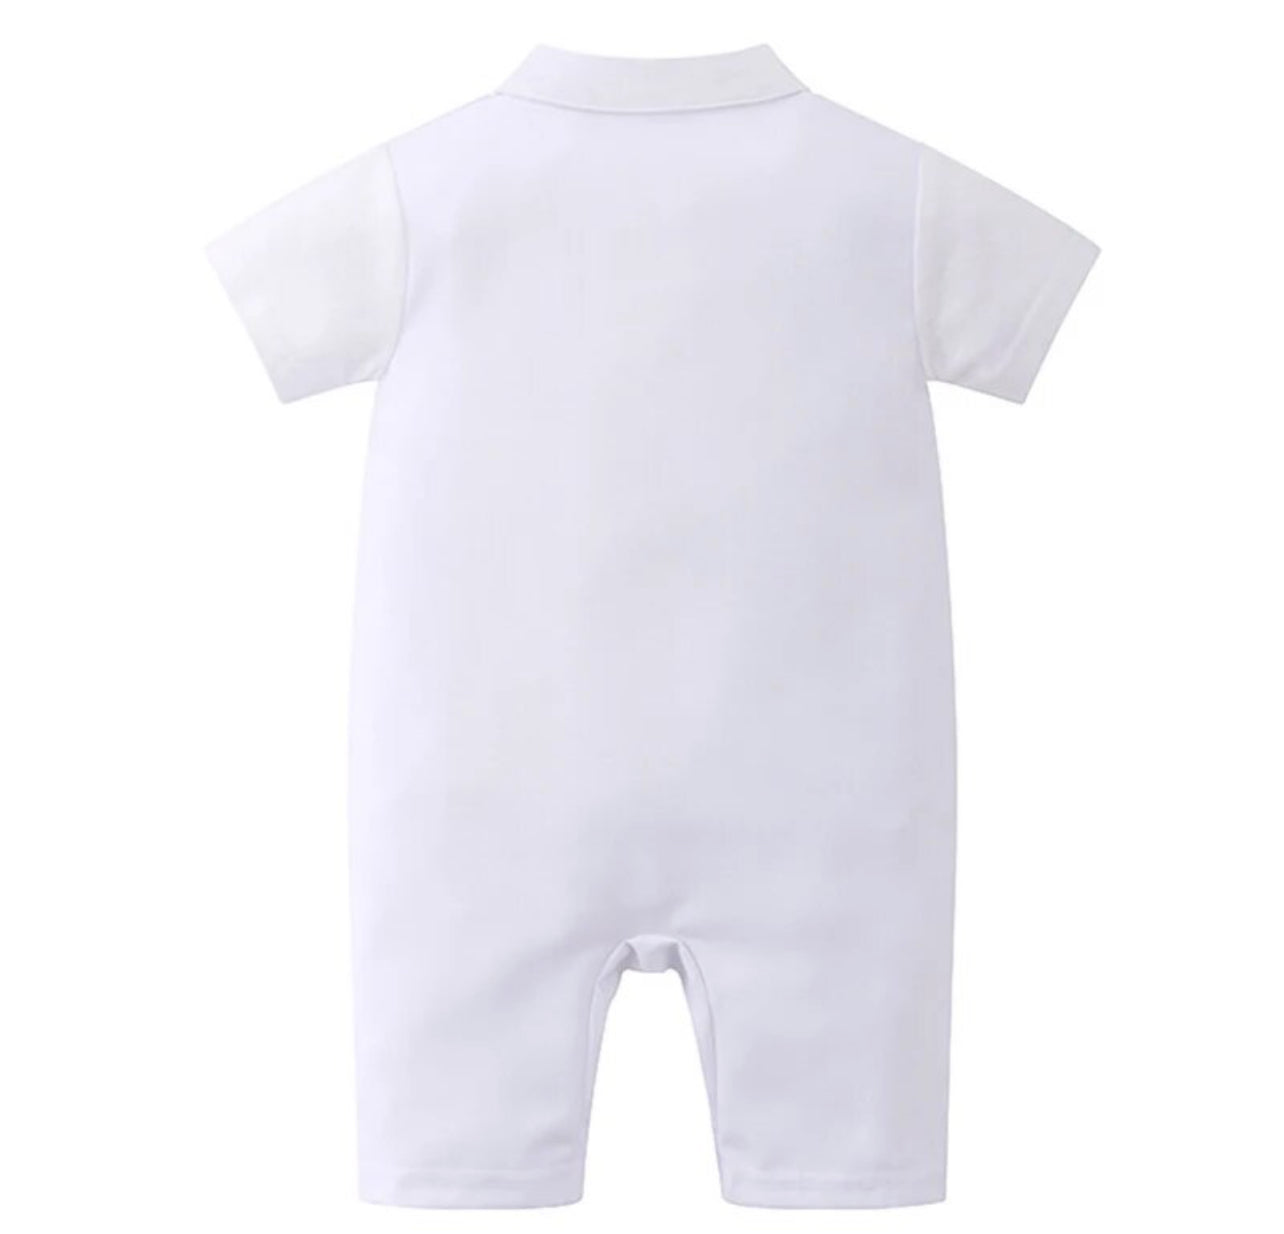 0-24 Months Baby Boys Formal Suit, White Romper, Tie